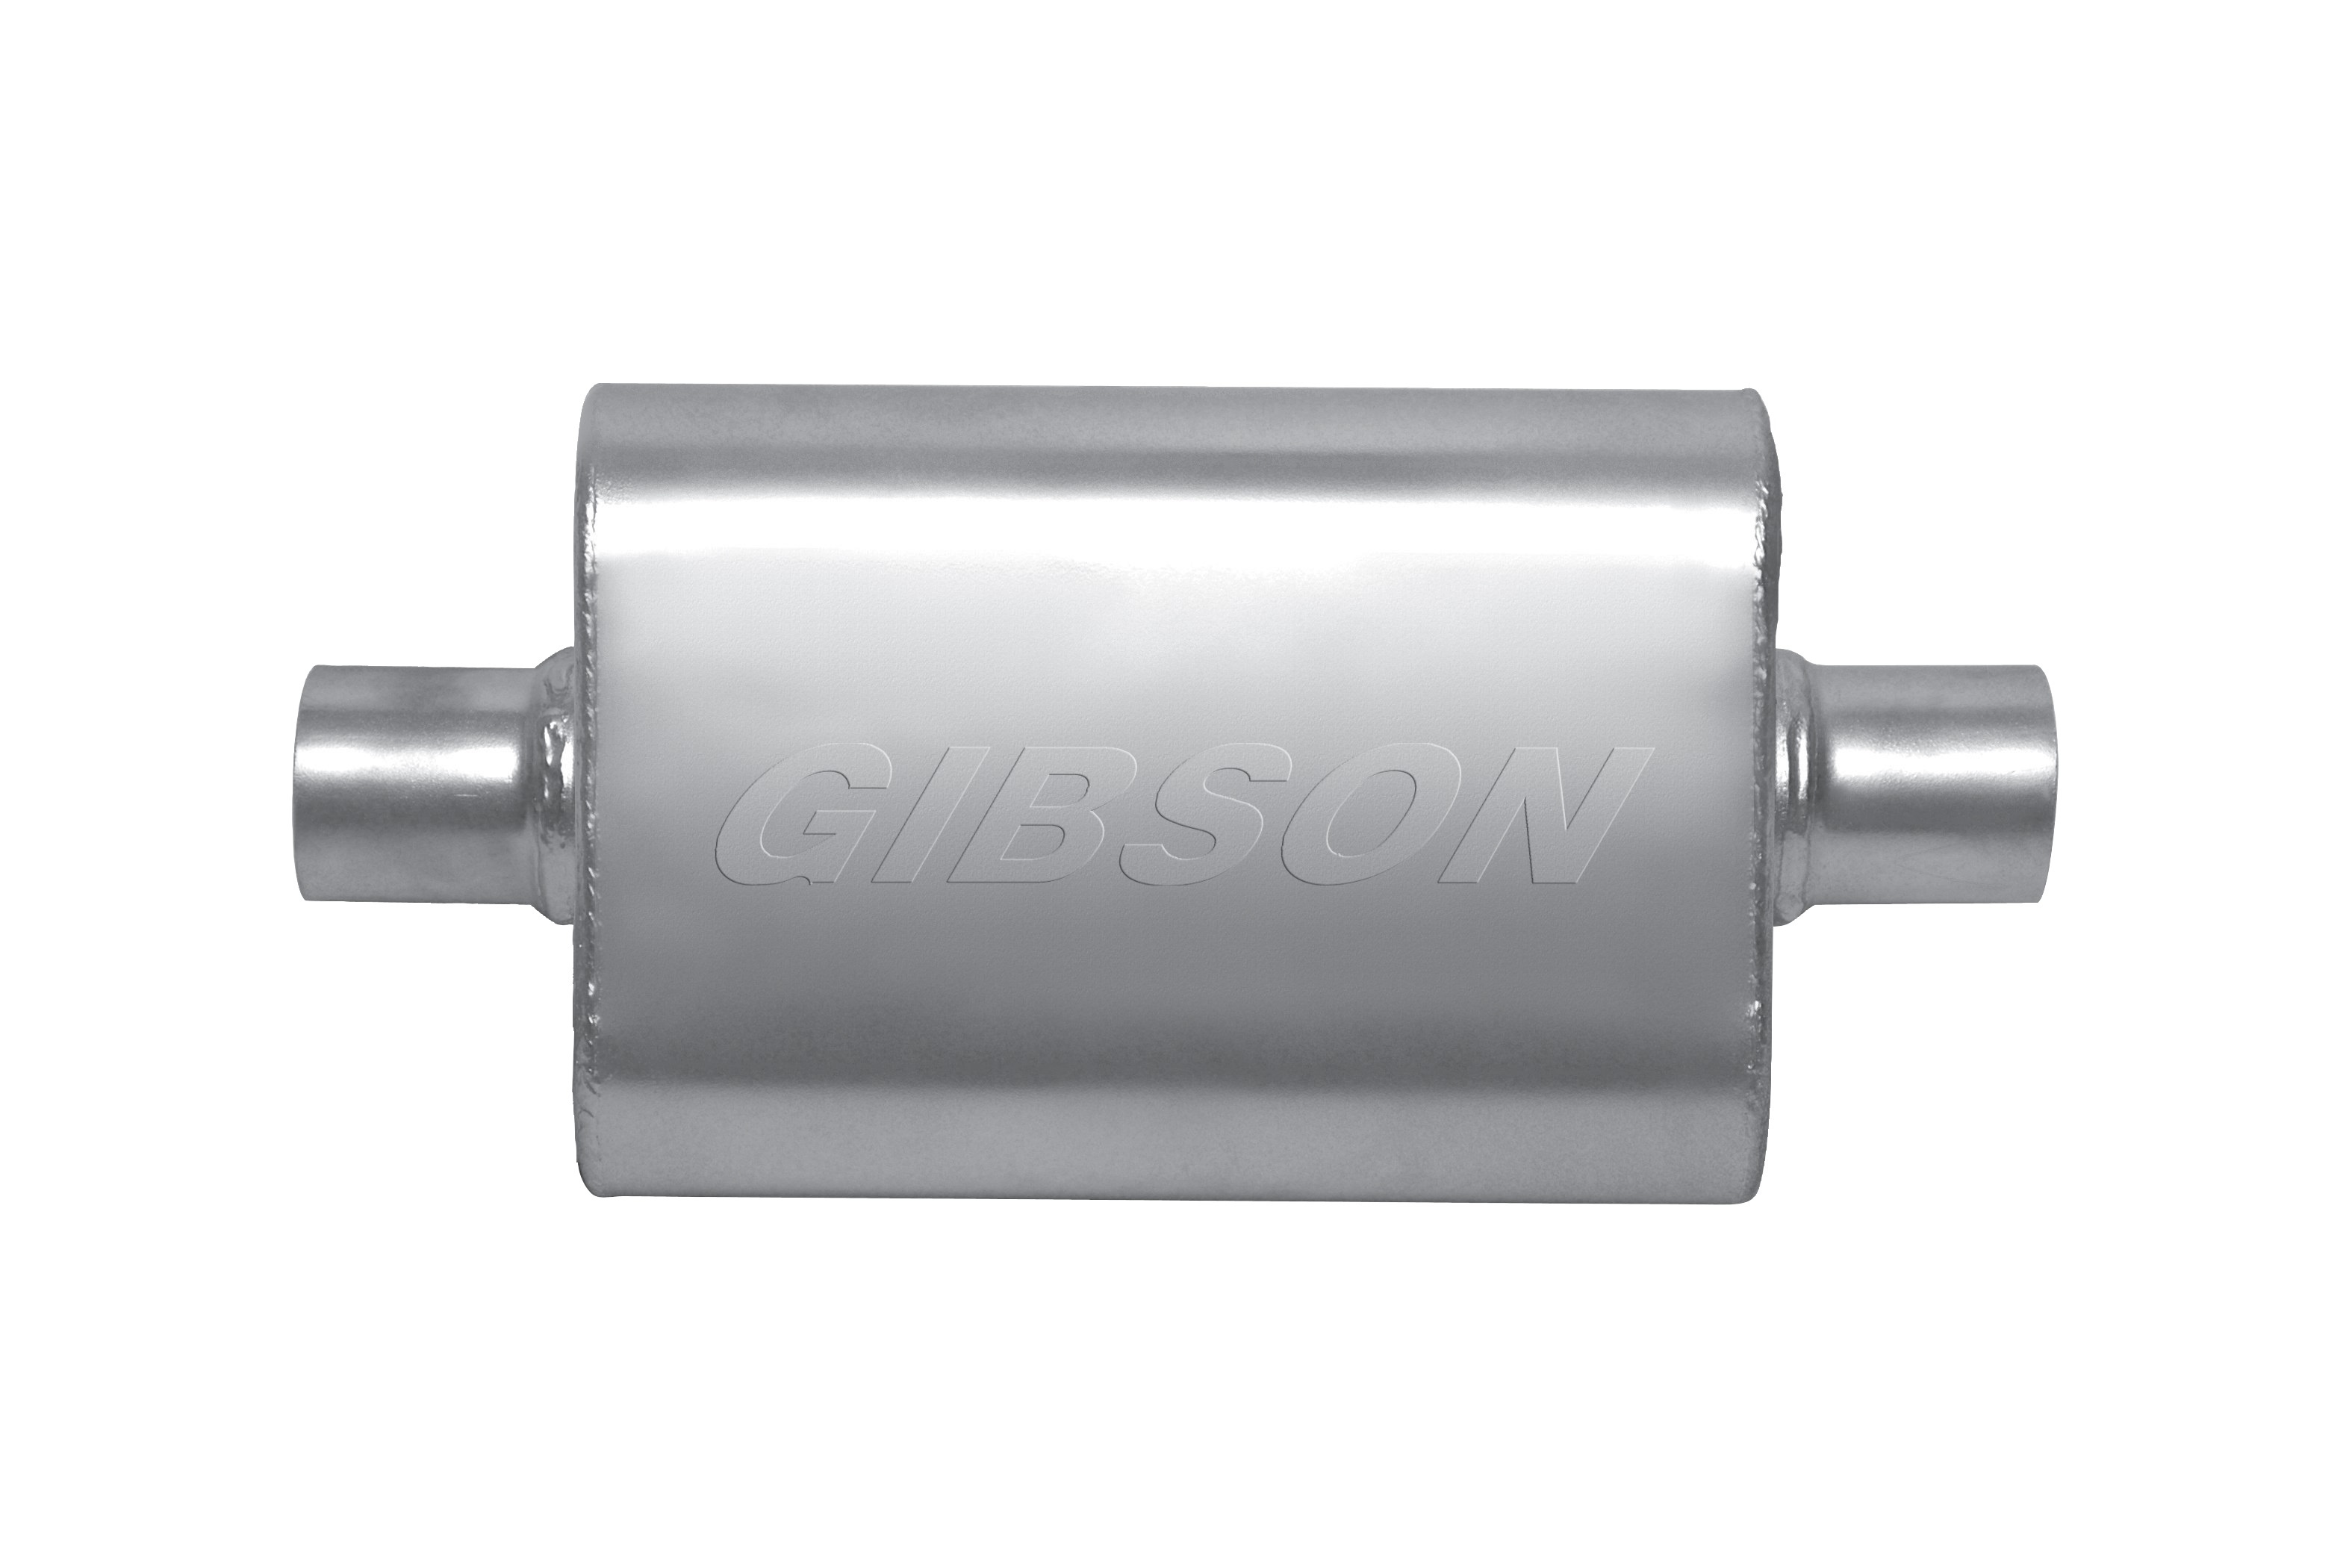 Gibson Exhaust BM0108 Muffler, MWA, 3 in Center Inlet, 3 in Center Outlet, 9 in Diameter Body, 14 in Long, Stainless, Universal, Each